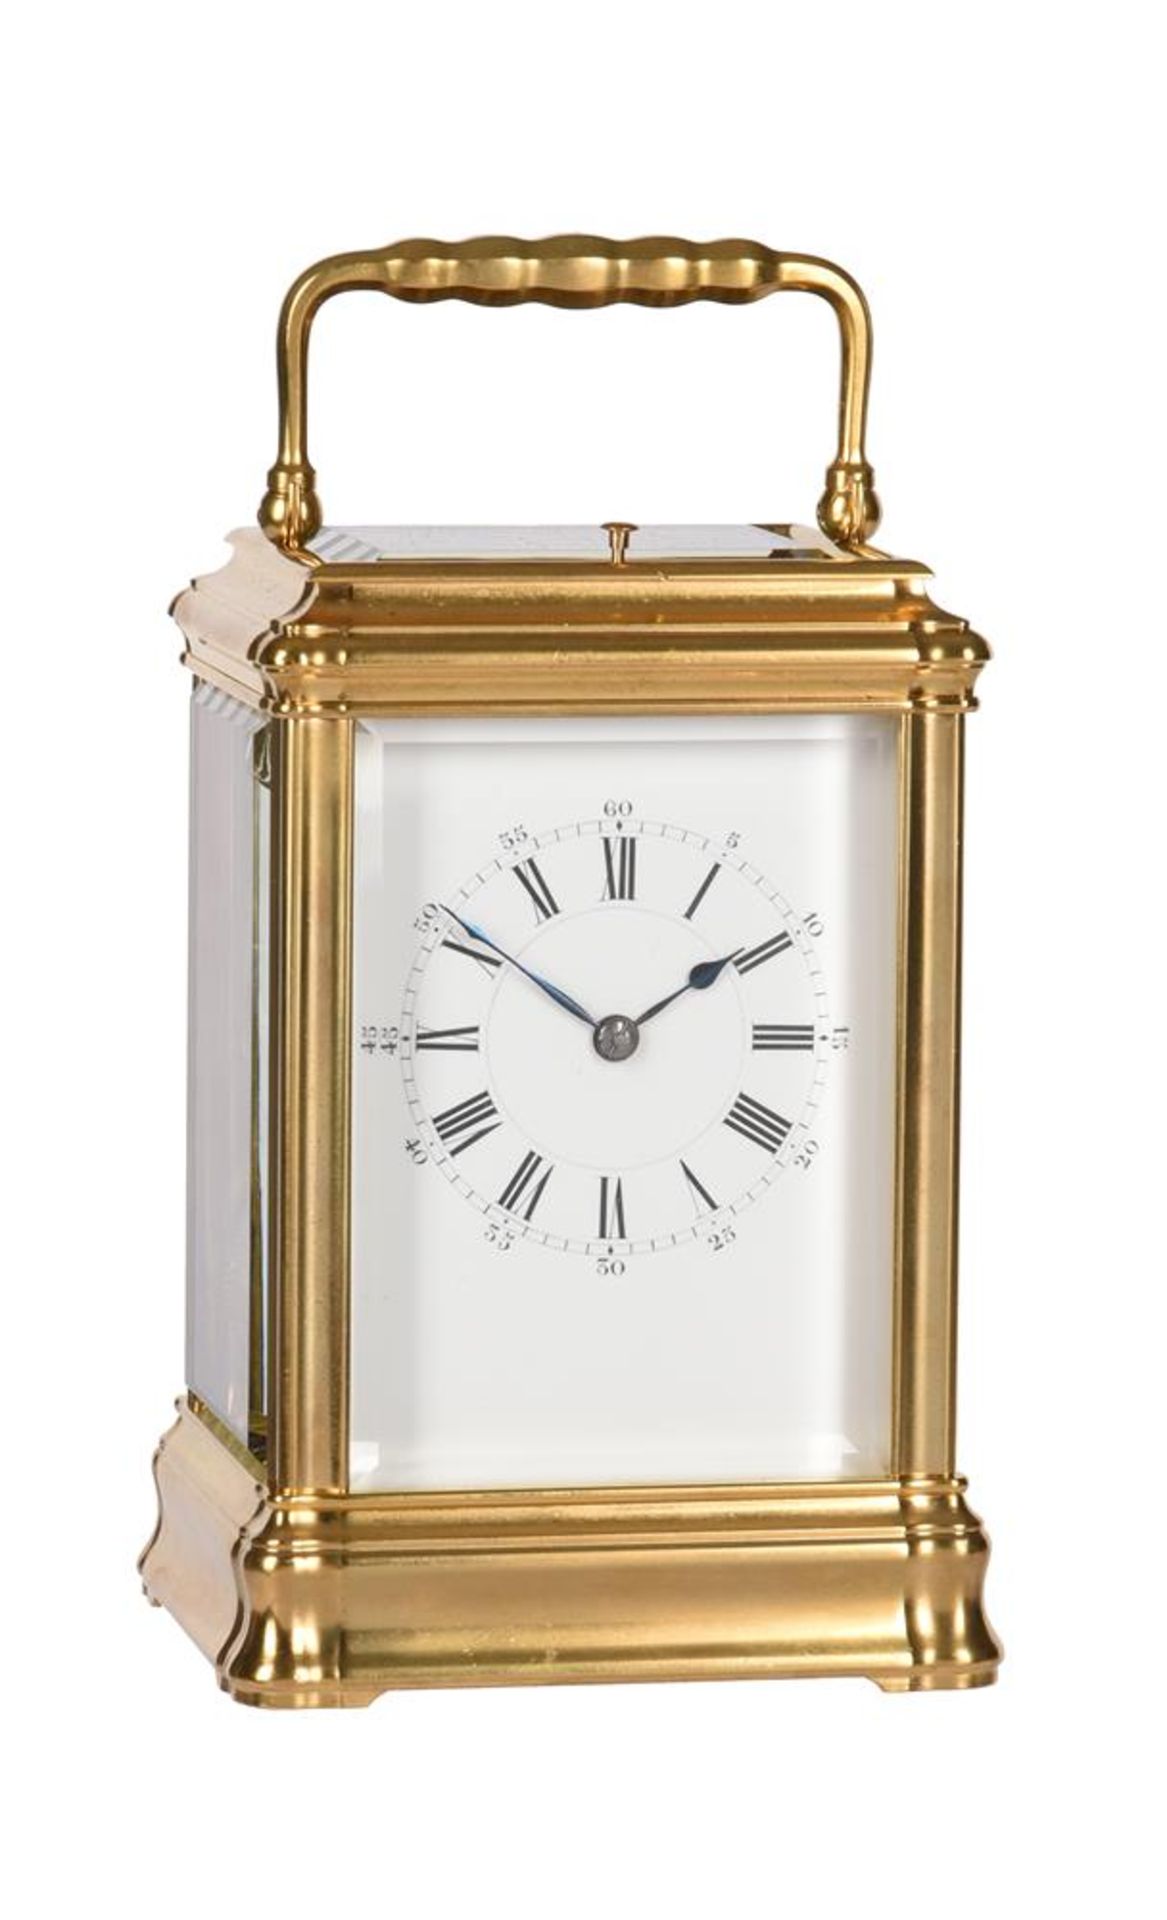 A FINE FRENCH GILT BRASS GORGE CASED GRANDE SONNERIE STRIKING CARRIAGE CLOCK